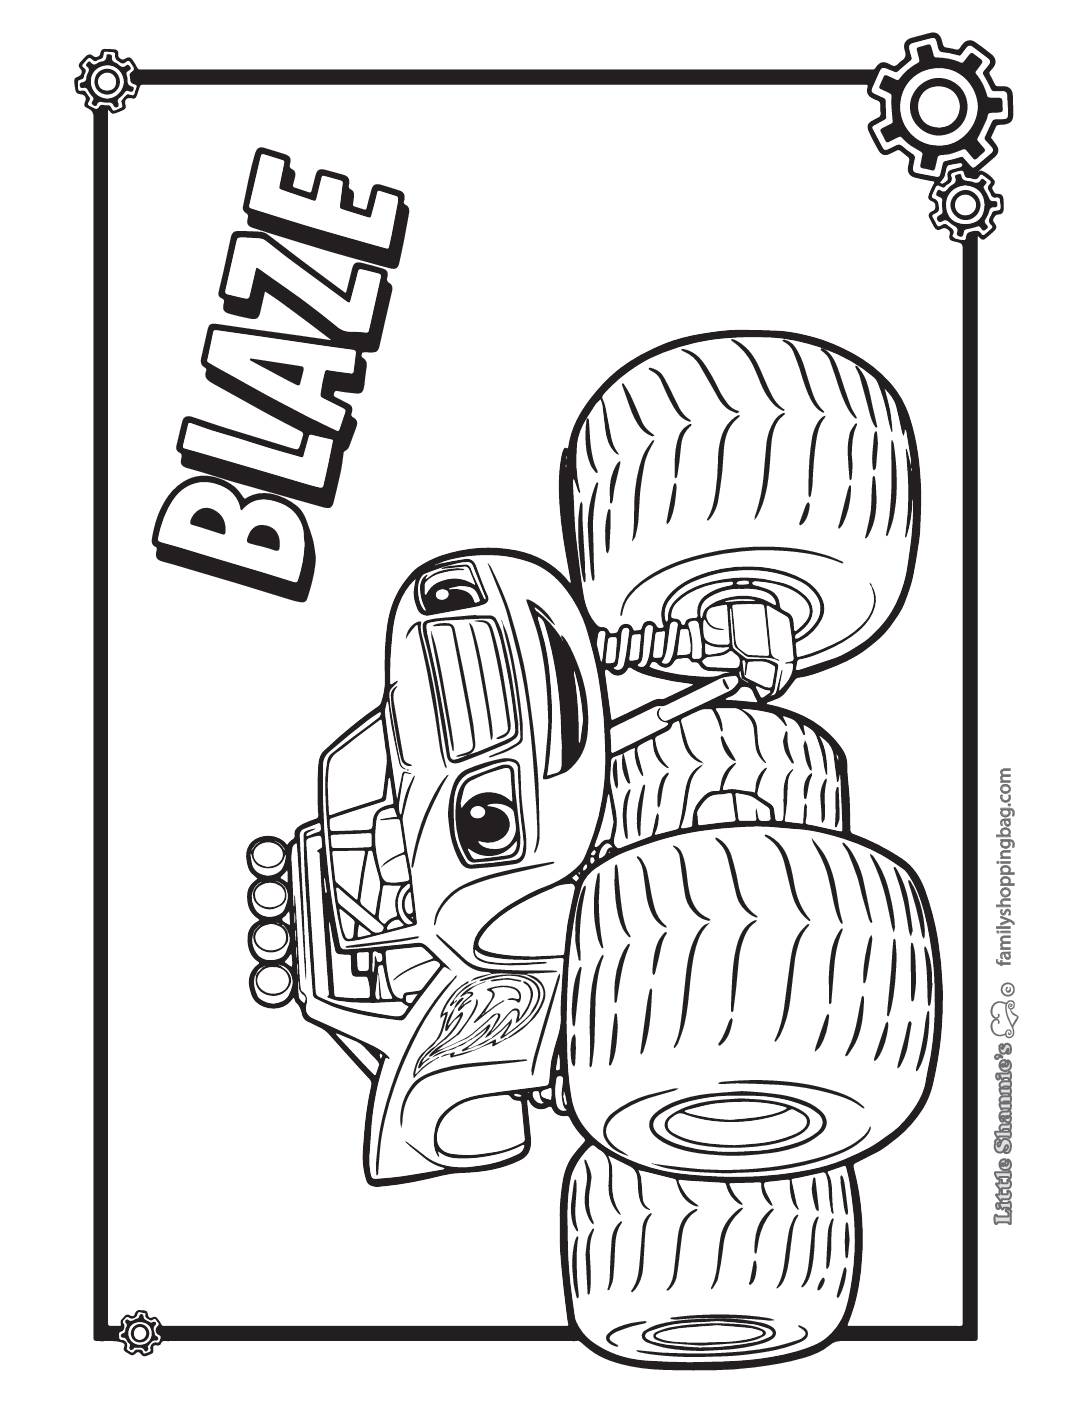 Coloring Page 4 Blaze Coloring Pages